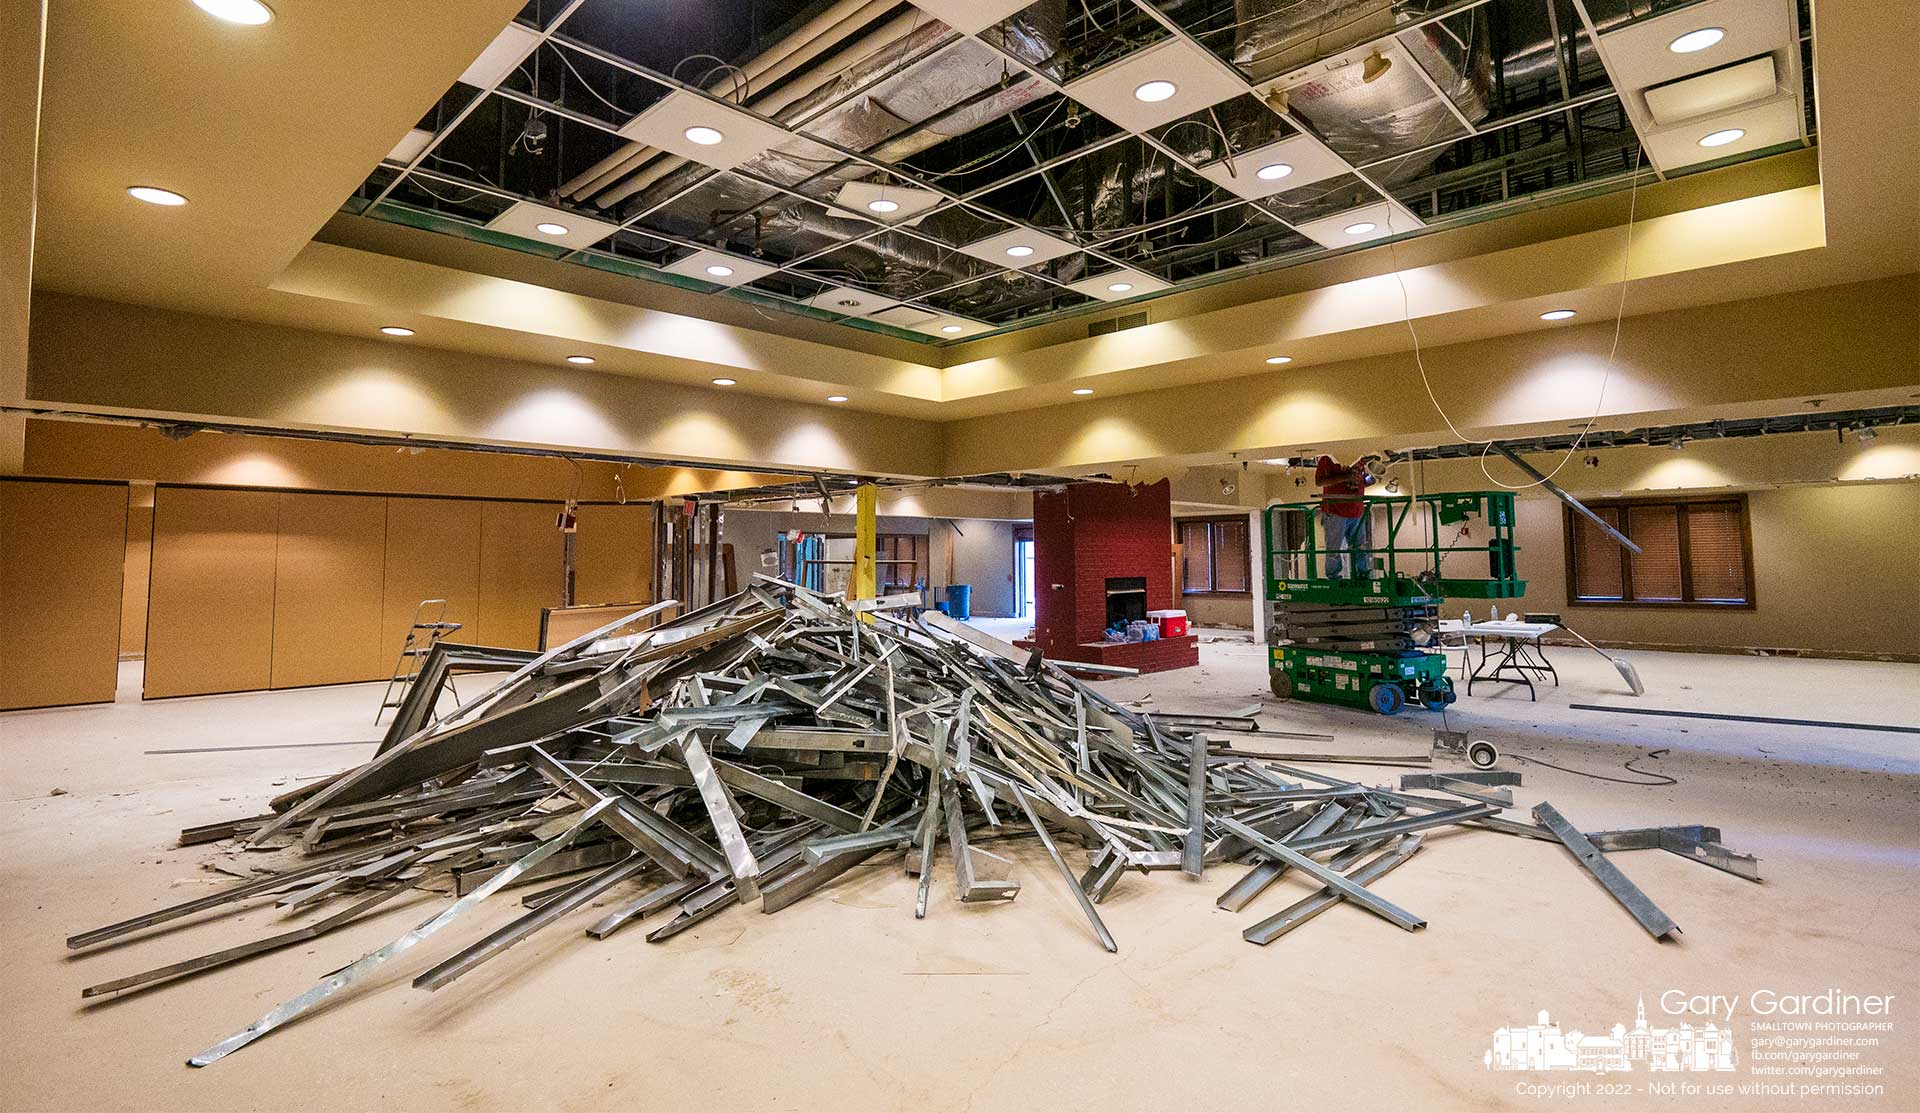 A collection of galvanized steel framing and other metal material lies in a pile where a contractor is demolishing the interior of the closed MCL cafeteria converting it into five separate business fronts, one of which will be a coffee shop. My Final Photo for June 2, 2022.